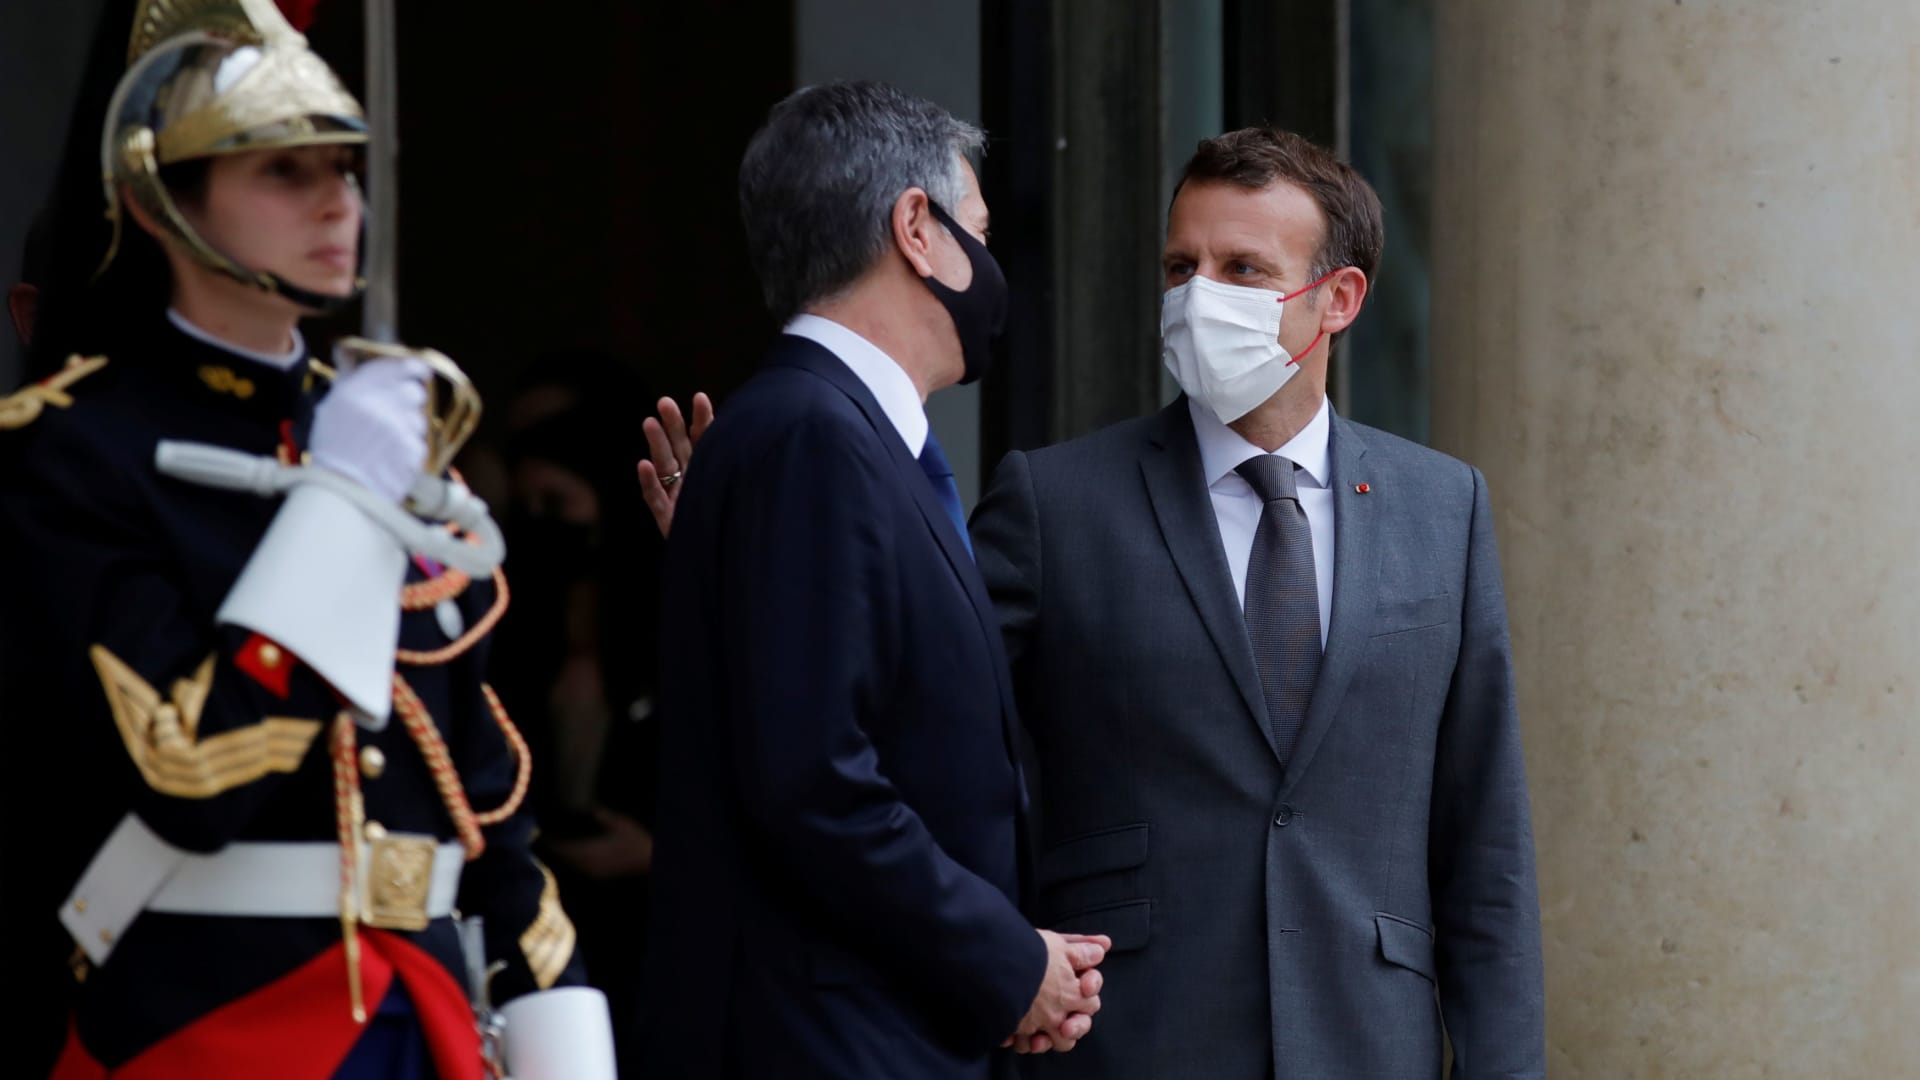 French President Emmanuel Macron accompanies U.S. Secretary of State Antony Blinken after a meeting at the Elysee Palace in Paris, France, June 25, 2021.